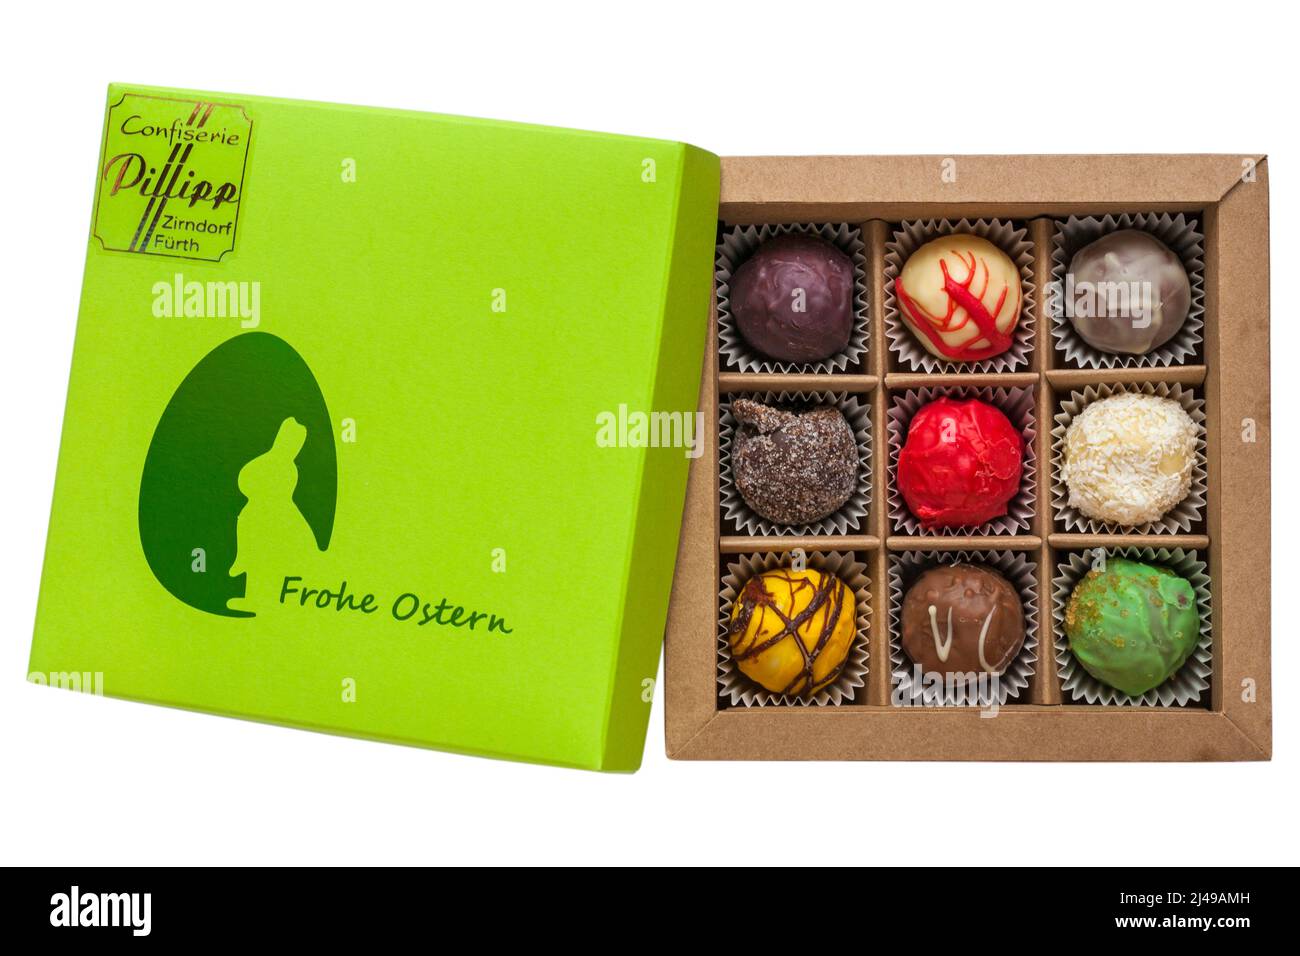 Box of Easter chocolates from Confiserie Pillipp Zirndorf Furth - Frohe Ostern with lid removed to show contents isolated on white background Stock Photo